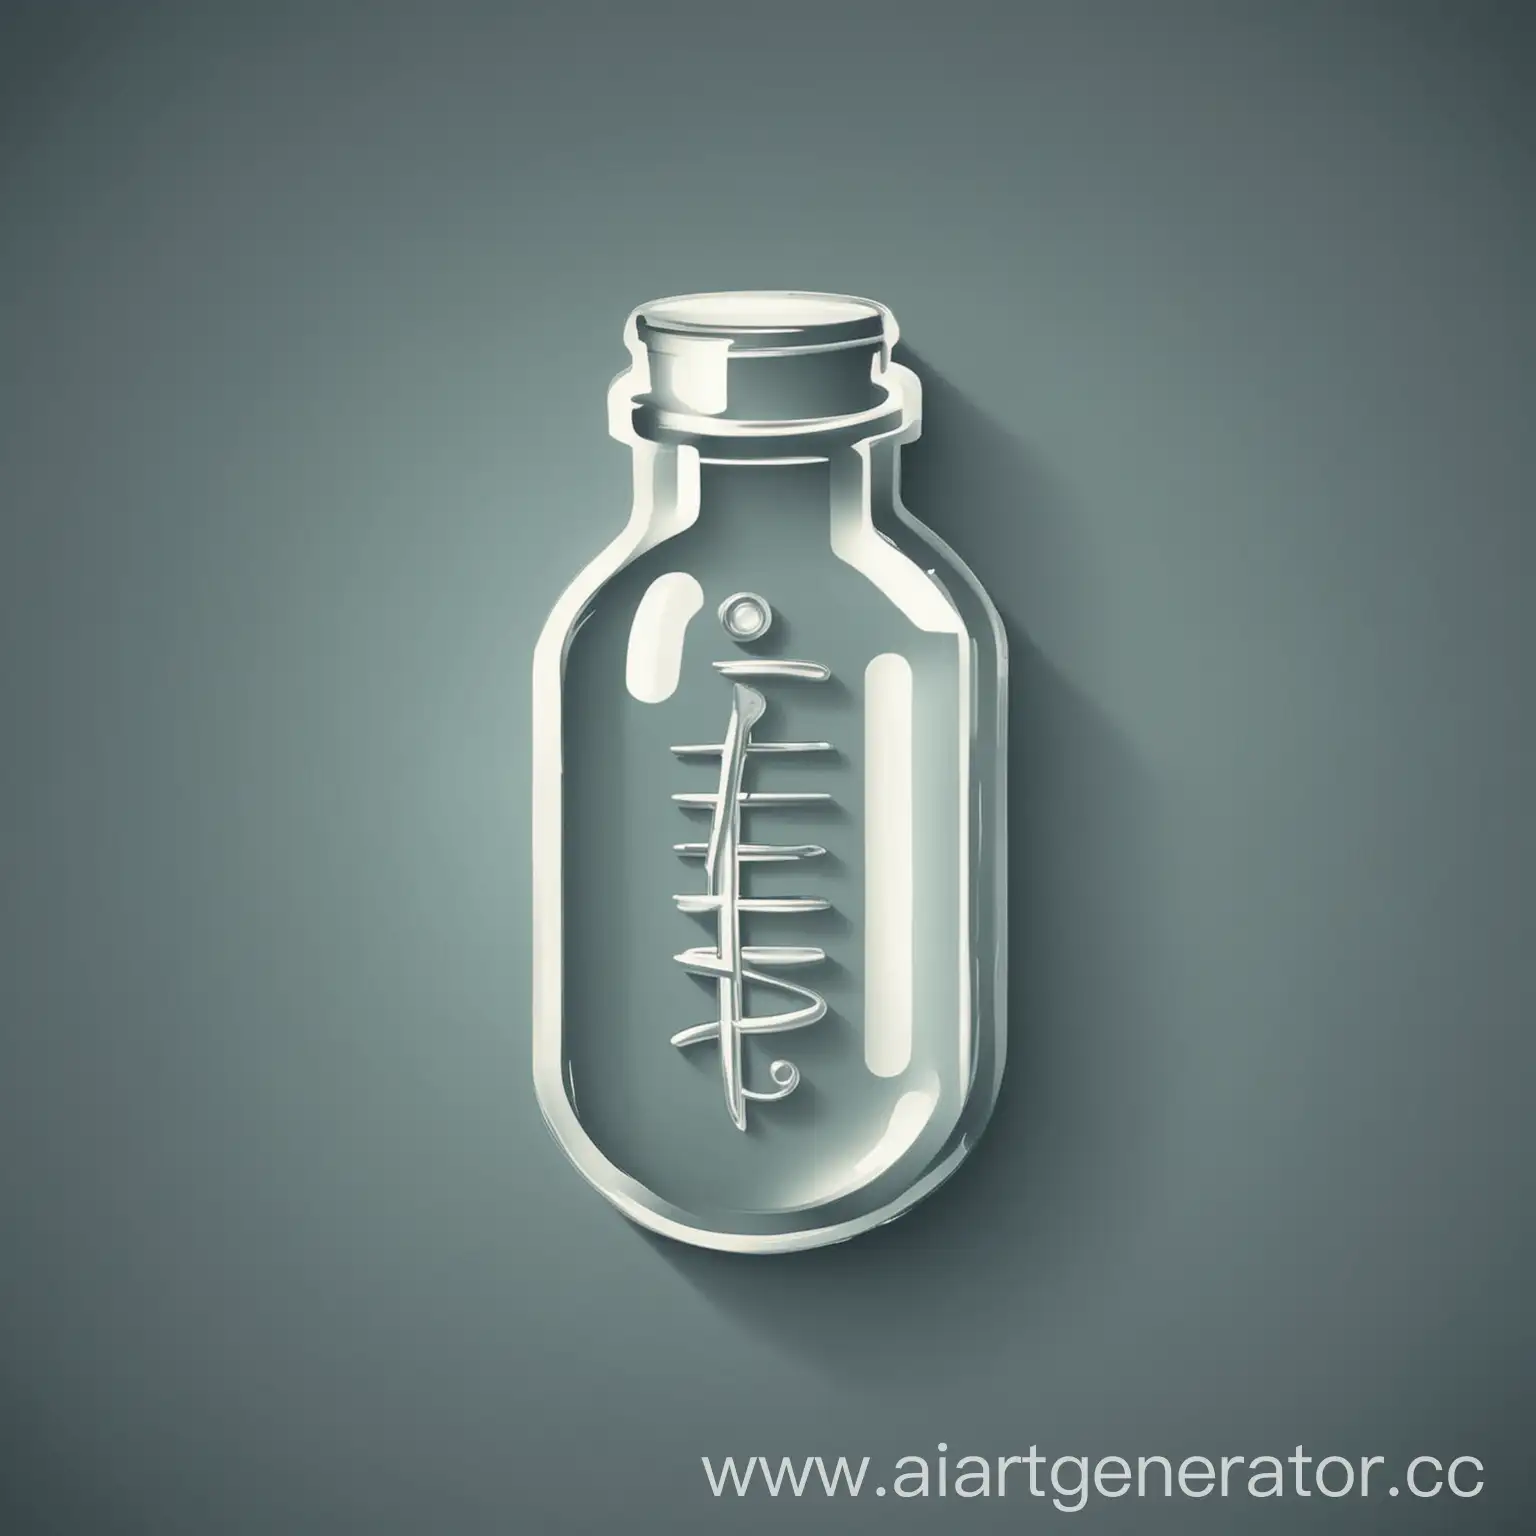 Medical-Vial-Icon-for-Injection-in-Flat-Design